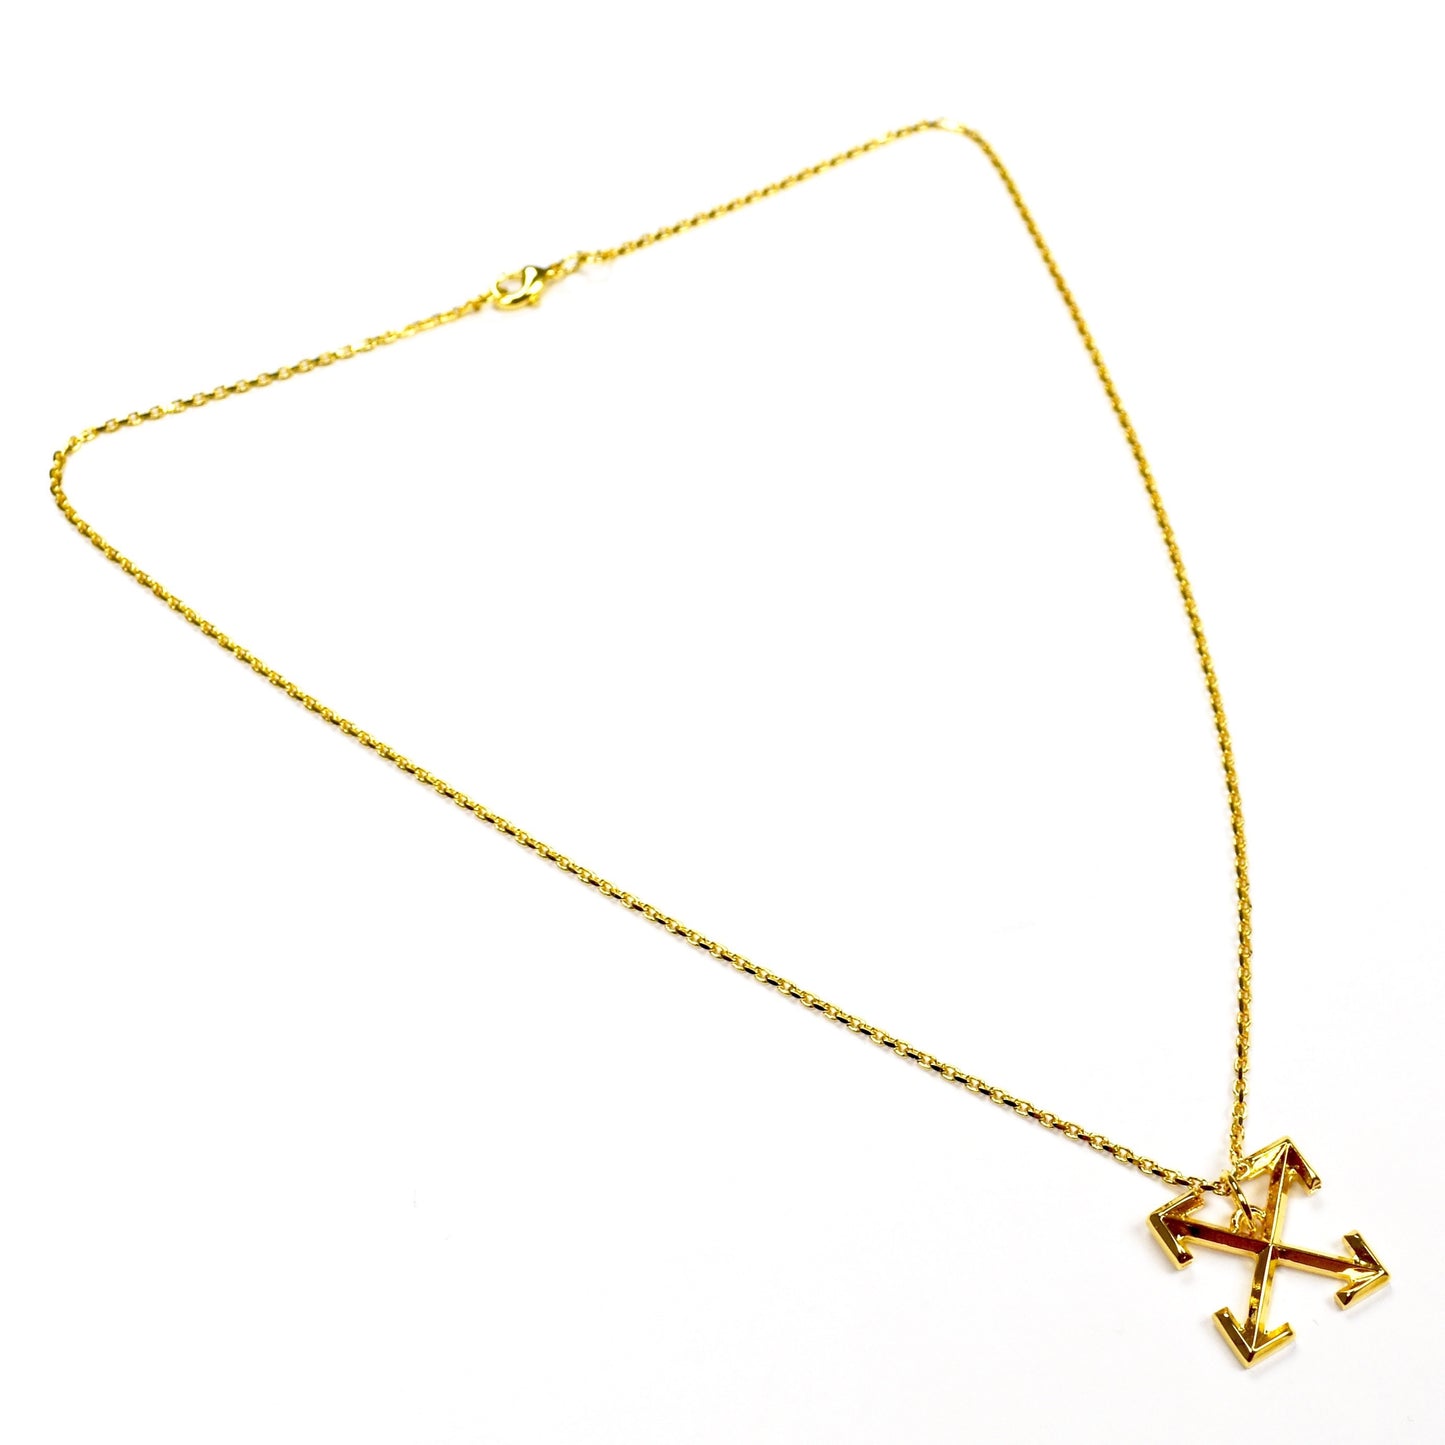 Off-White - Gold Arrows Logo Chain Necklace